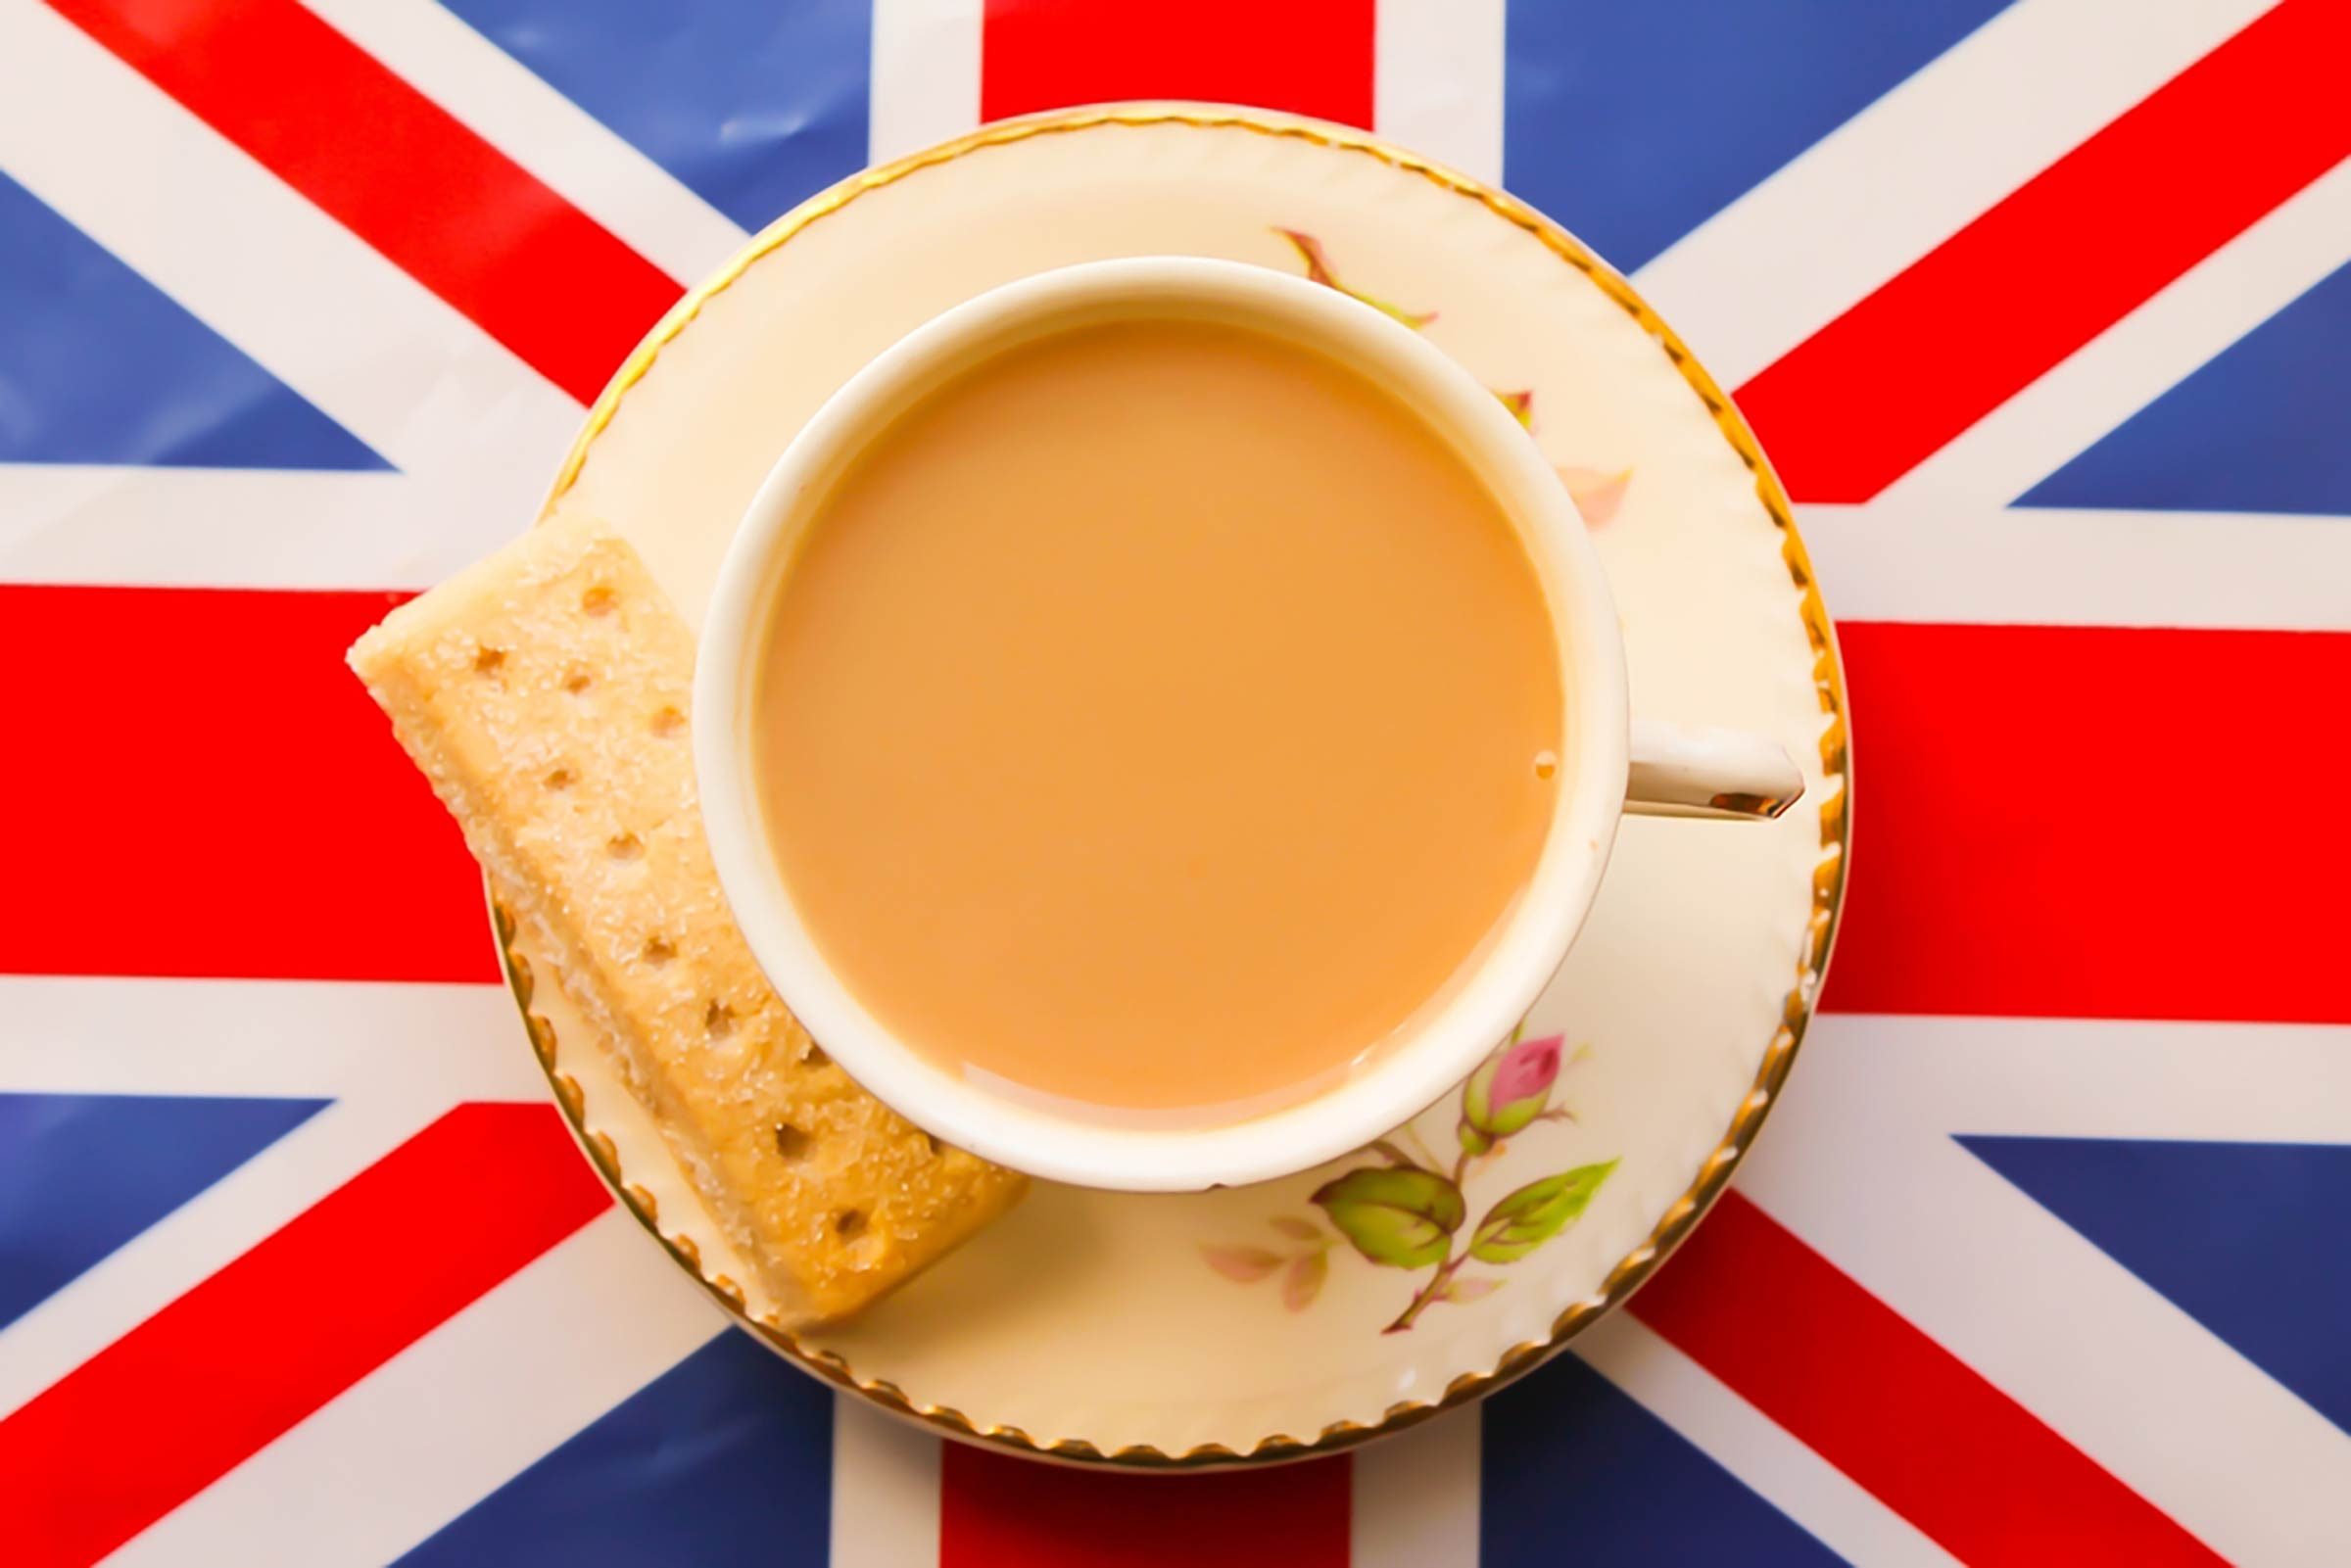 https://www.rd.com/wp-content/uploads/2017/08/This-is-Why-the-British-Drink-So-Much-Tea_225199282_Jo-Millington.jpg?fit=700%2C1024